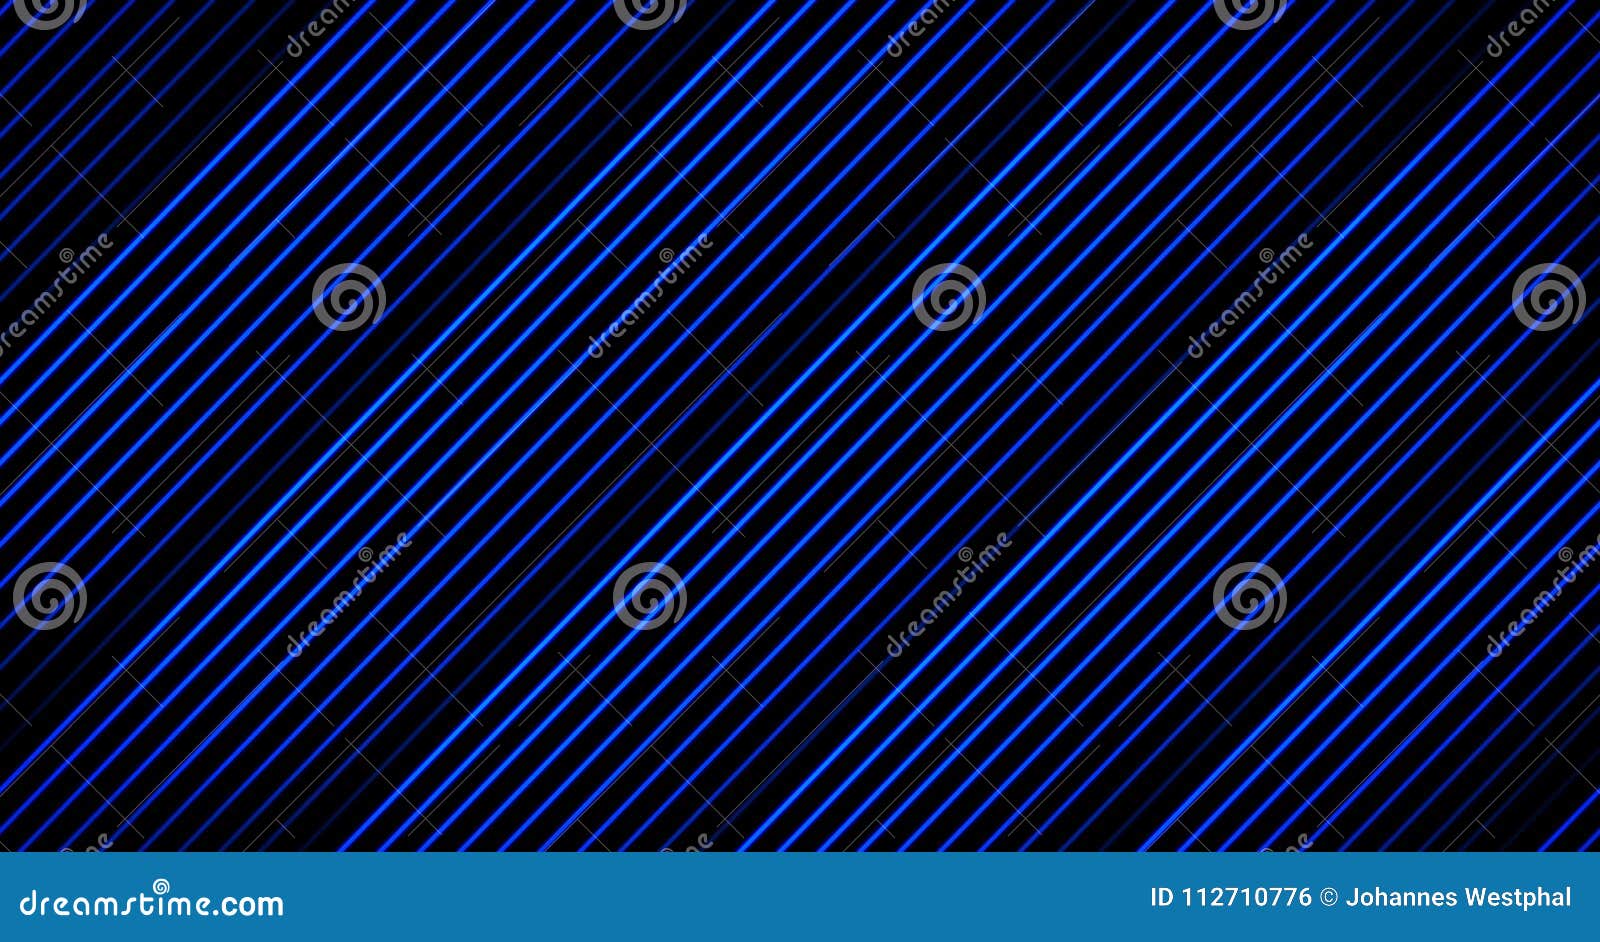 Background Line Animation Fading Away in Blue Tones on Black from 4k ...